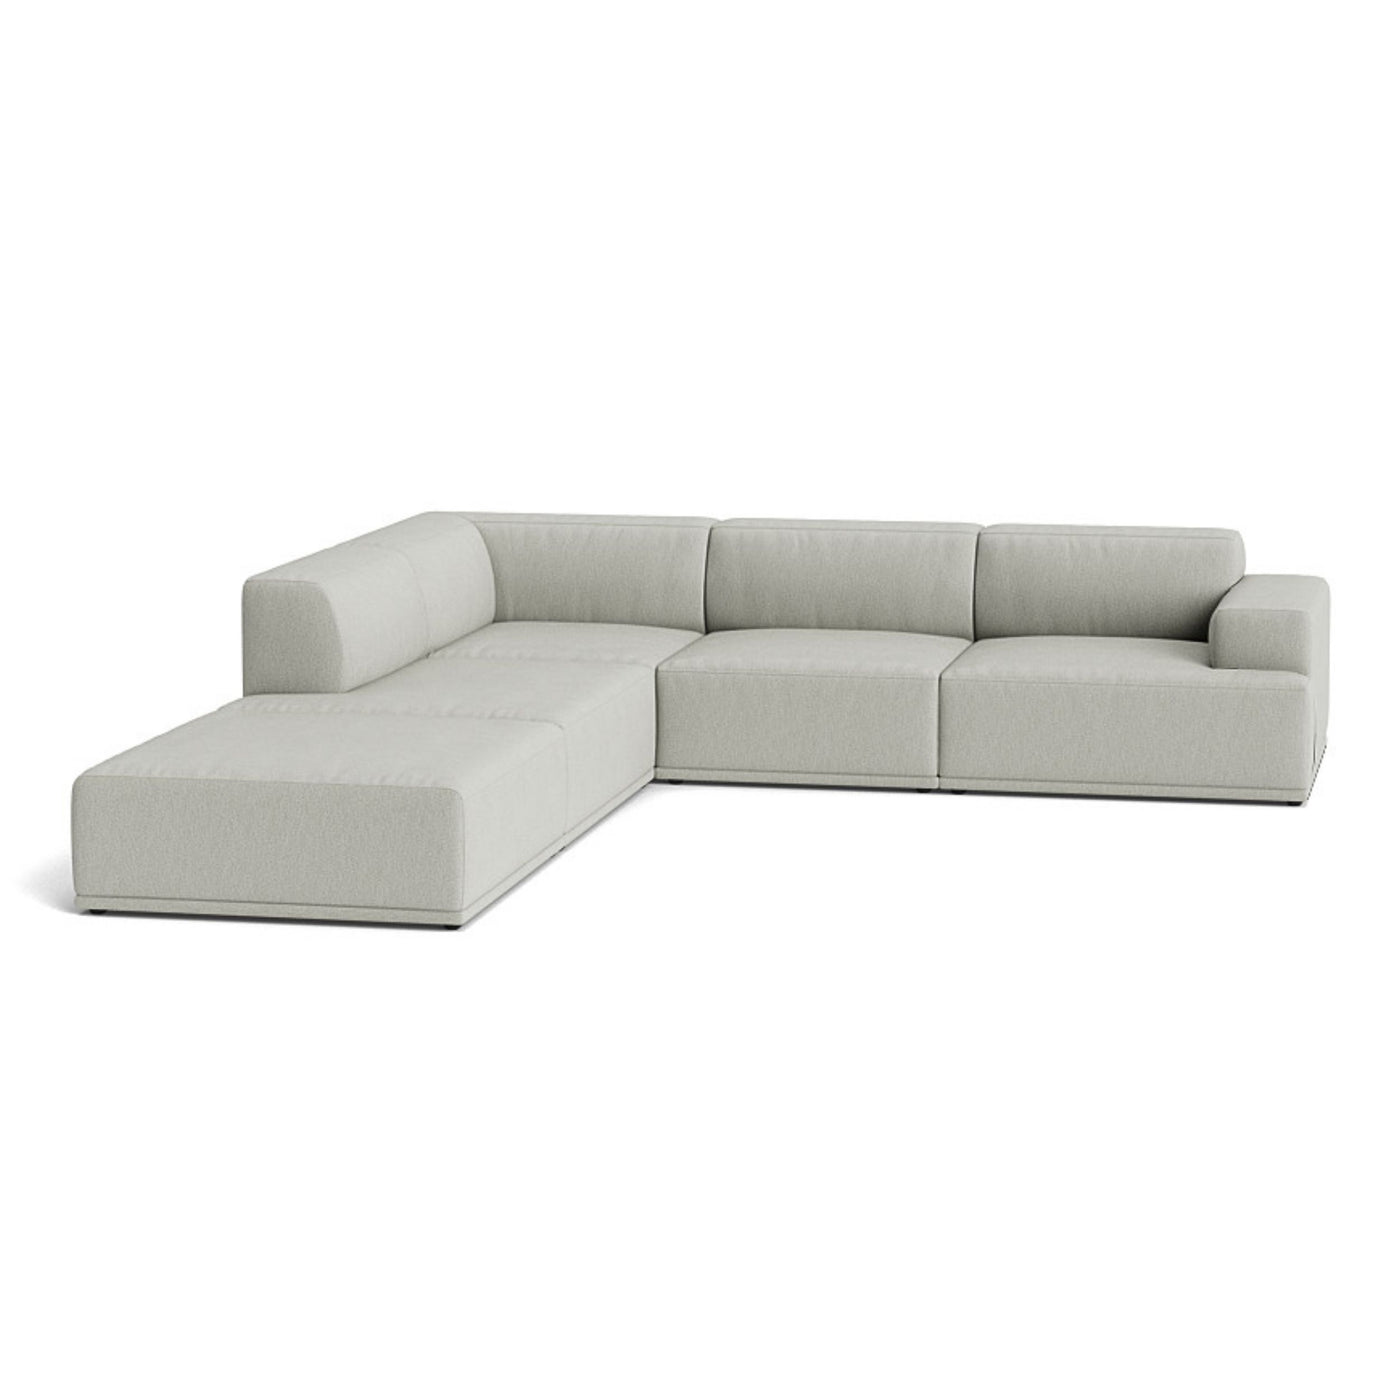 Muuto Connect Soft Modular Corner Sofa, configuration 1. Made-to-order from someday designs. #colour_clay-12